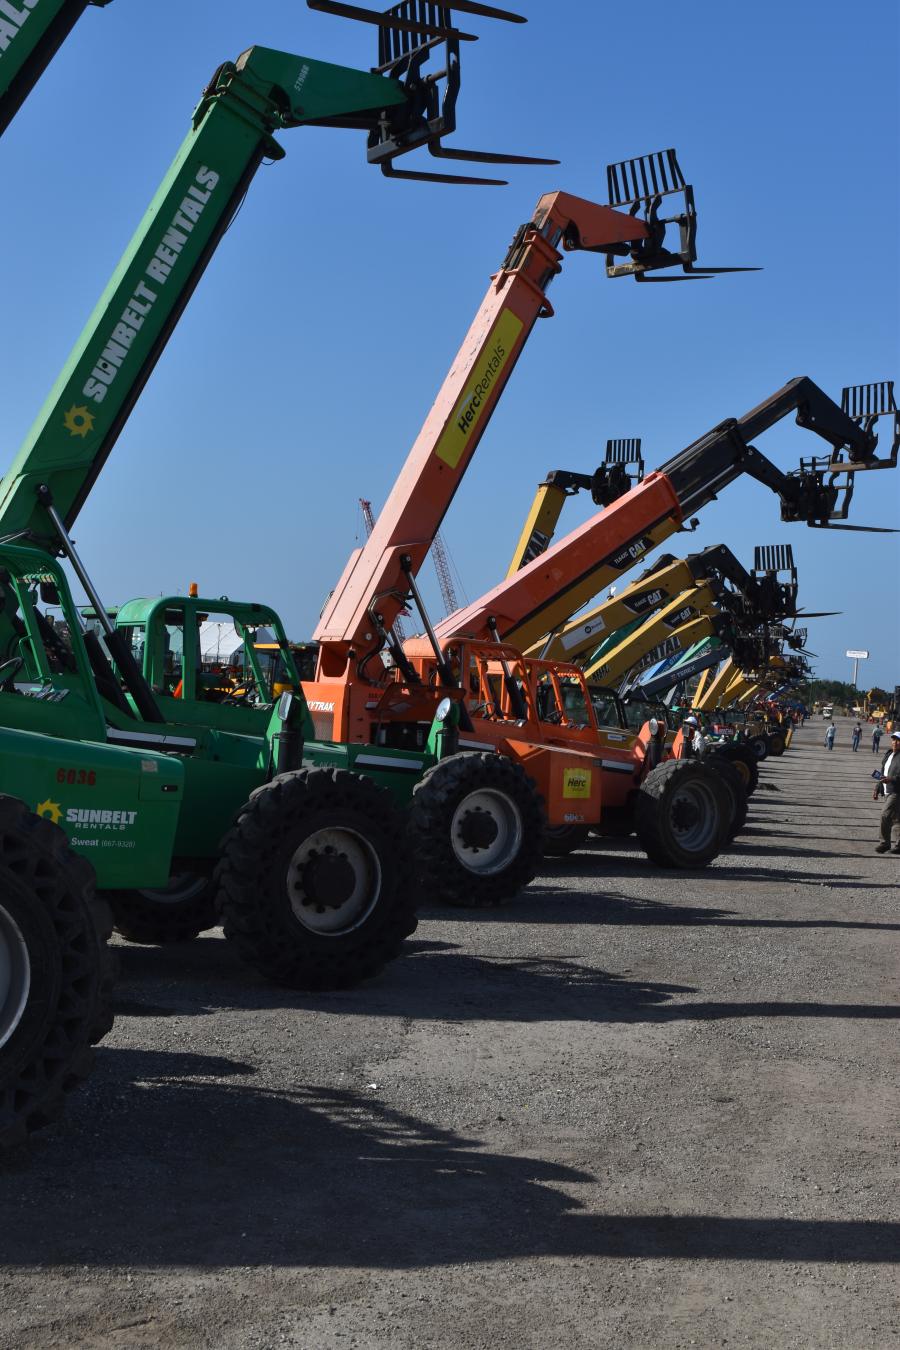 A huge selection of lifts out of rental fleets from across the United States.